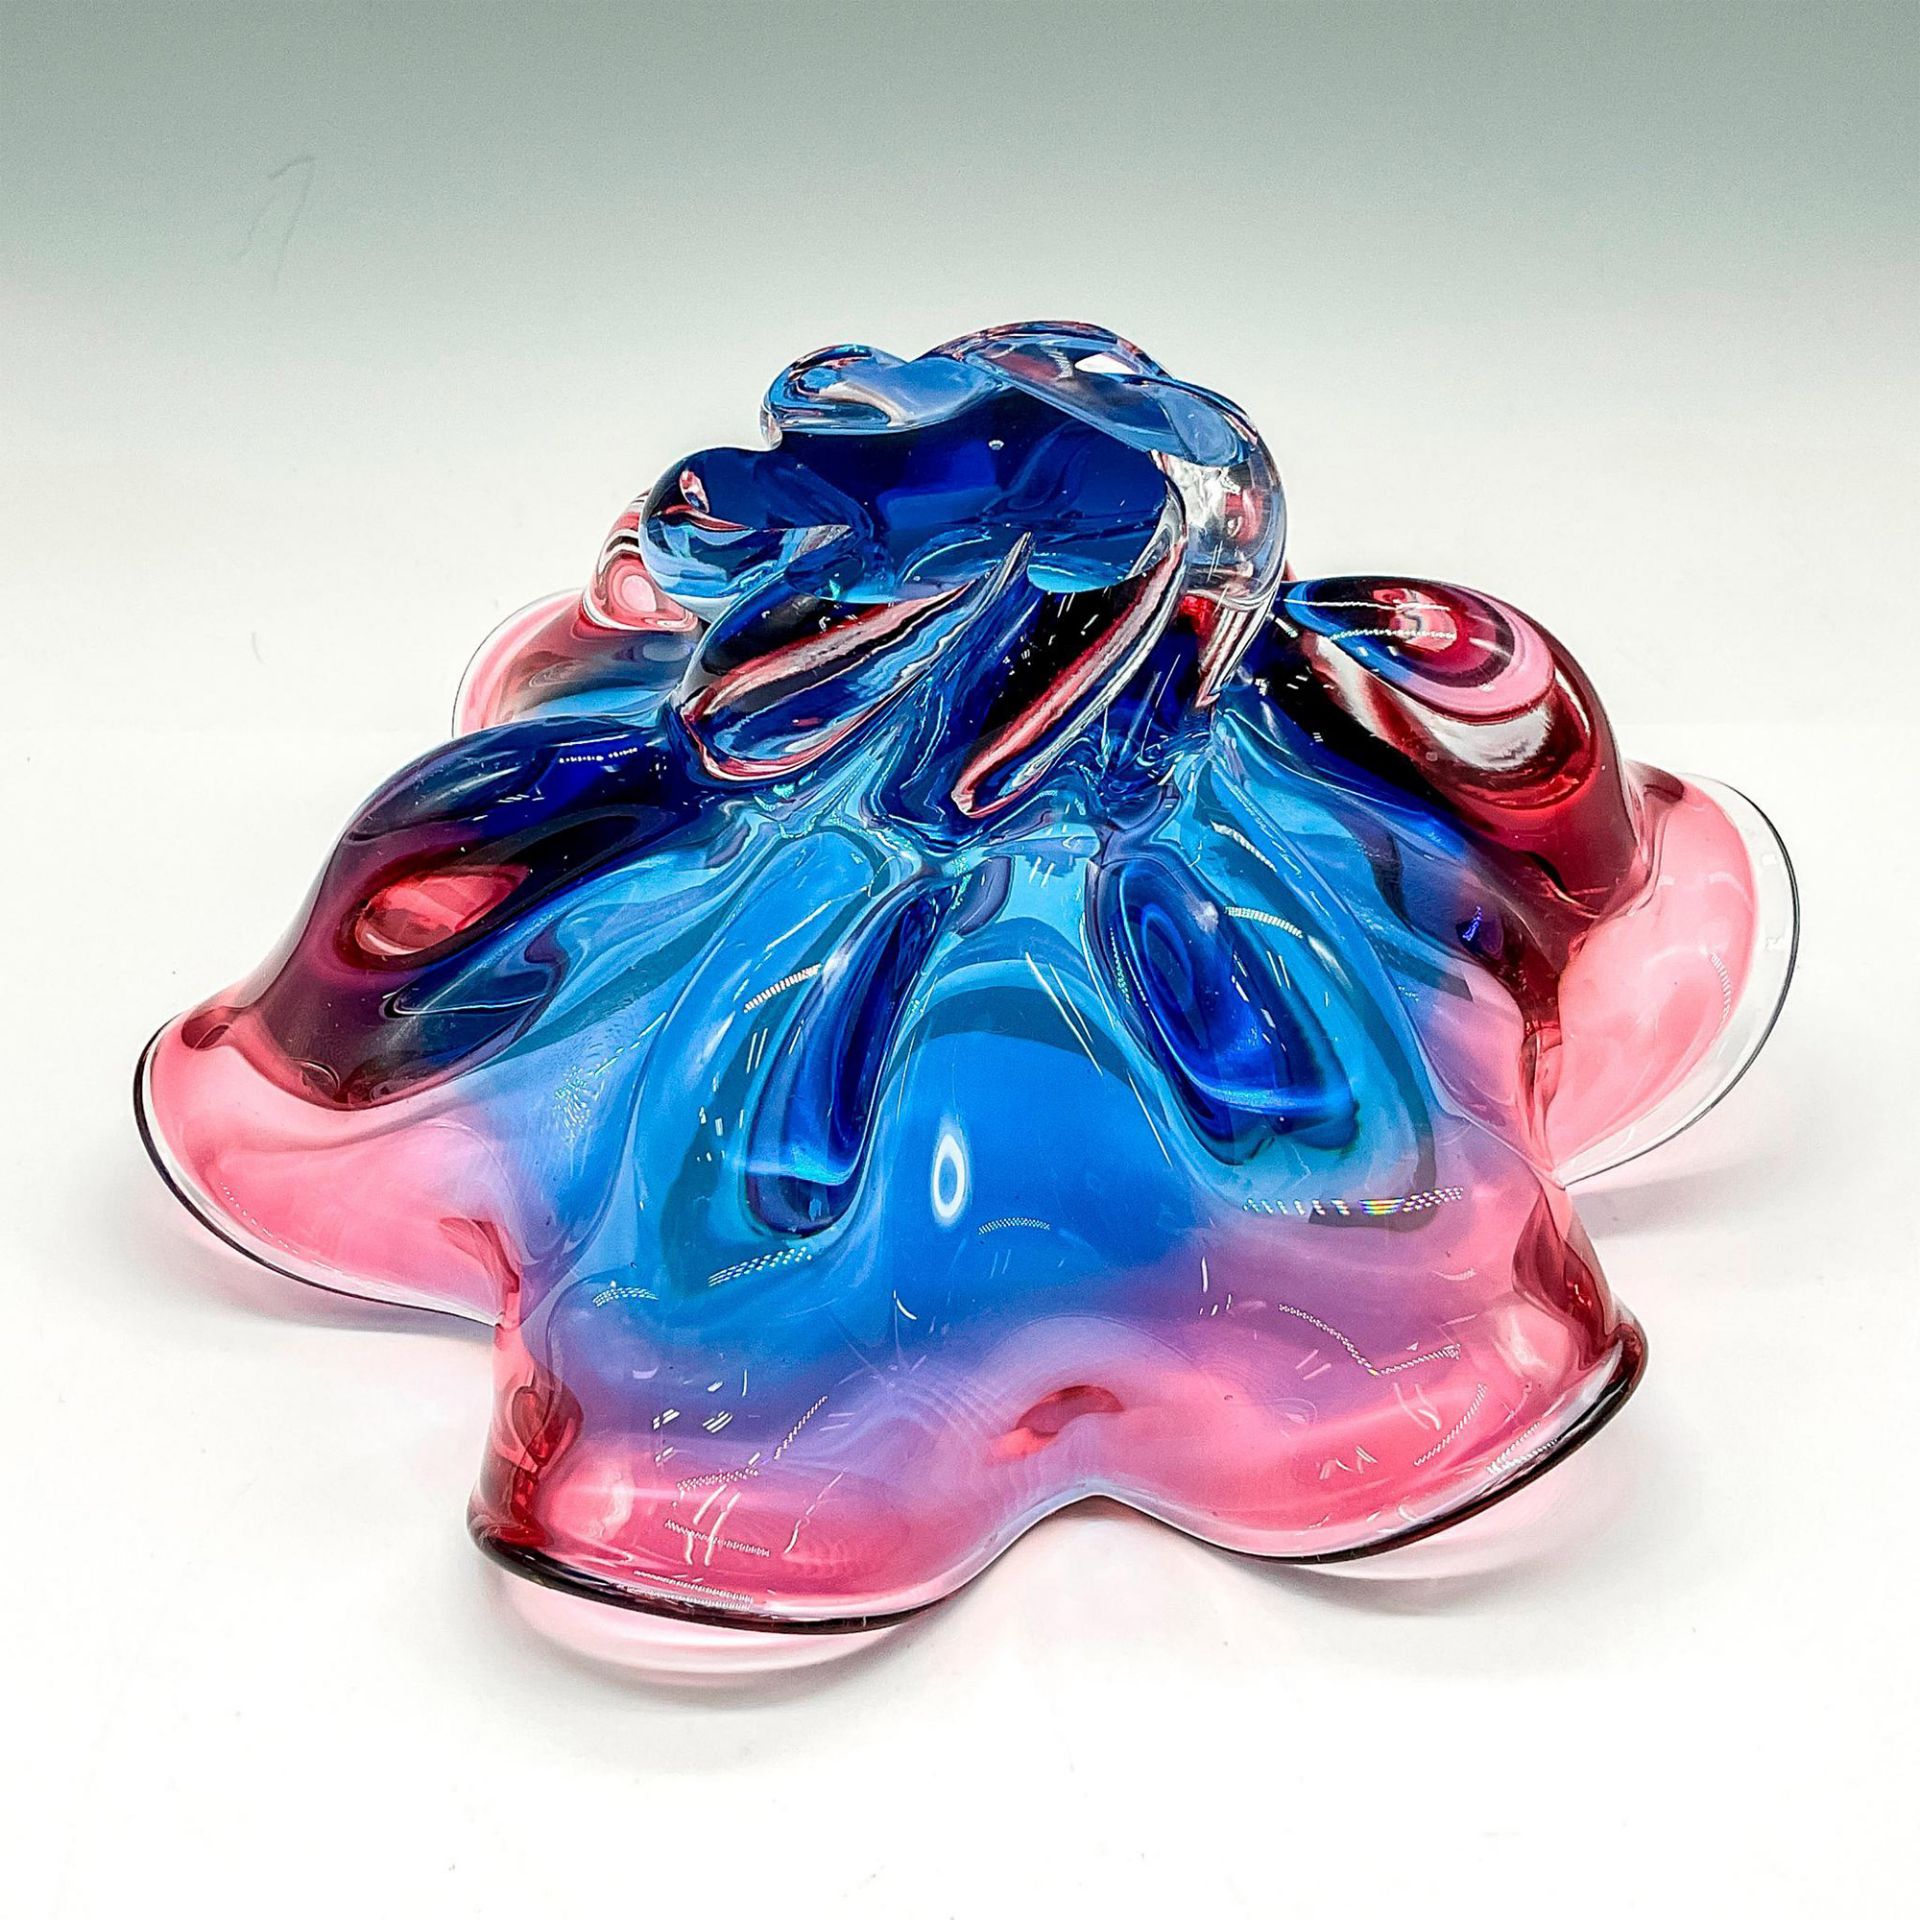 Murano Style Handmade Glass Compote Bowl - Image 3 of 3